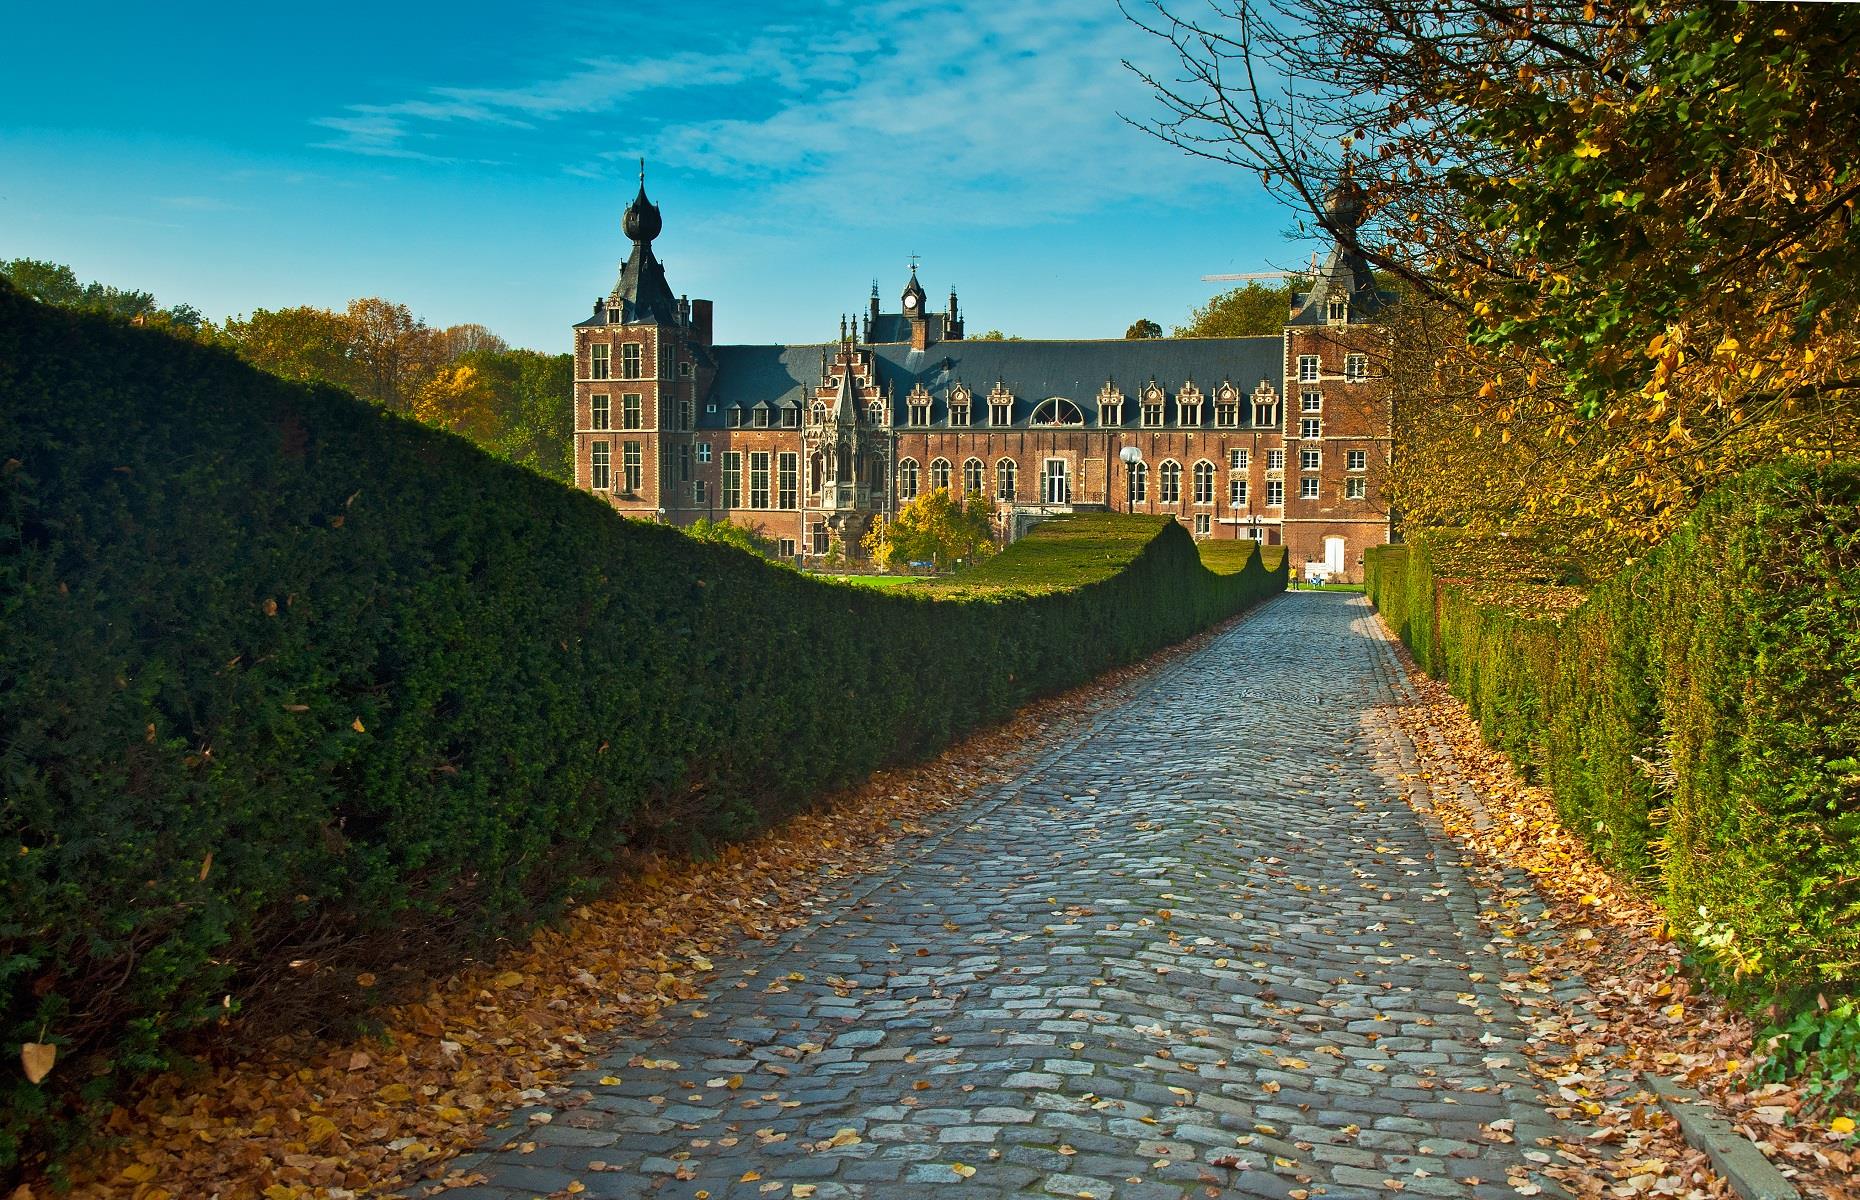 <p>Over in Leuven, Belgium, you'll find a university that could be plucked from the pages of a storybook. <a href="https://www.kuleuven.be/english/">Katholieke Universiteit Leuven</a> was founded in 1425 and, as such, is one of Europe’s oldest. The university owns an array of buildings, including three absolute jewels: the University Library of Leuven, Arenberg Castle (pictured) and University Hall. Formerly a cloth makers’ hall, the latter was constructed in 1317 and is now the heart of this important institution.</p>  <p><a href="https://www.loveexploring.com/news/161161/bruges-things-to-do-what-to-do-in-bruges"><strong>How to spend 48 hours in Bruges</strong></a></p>